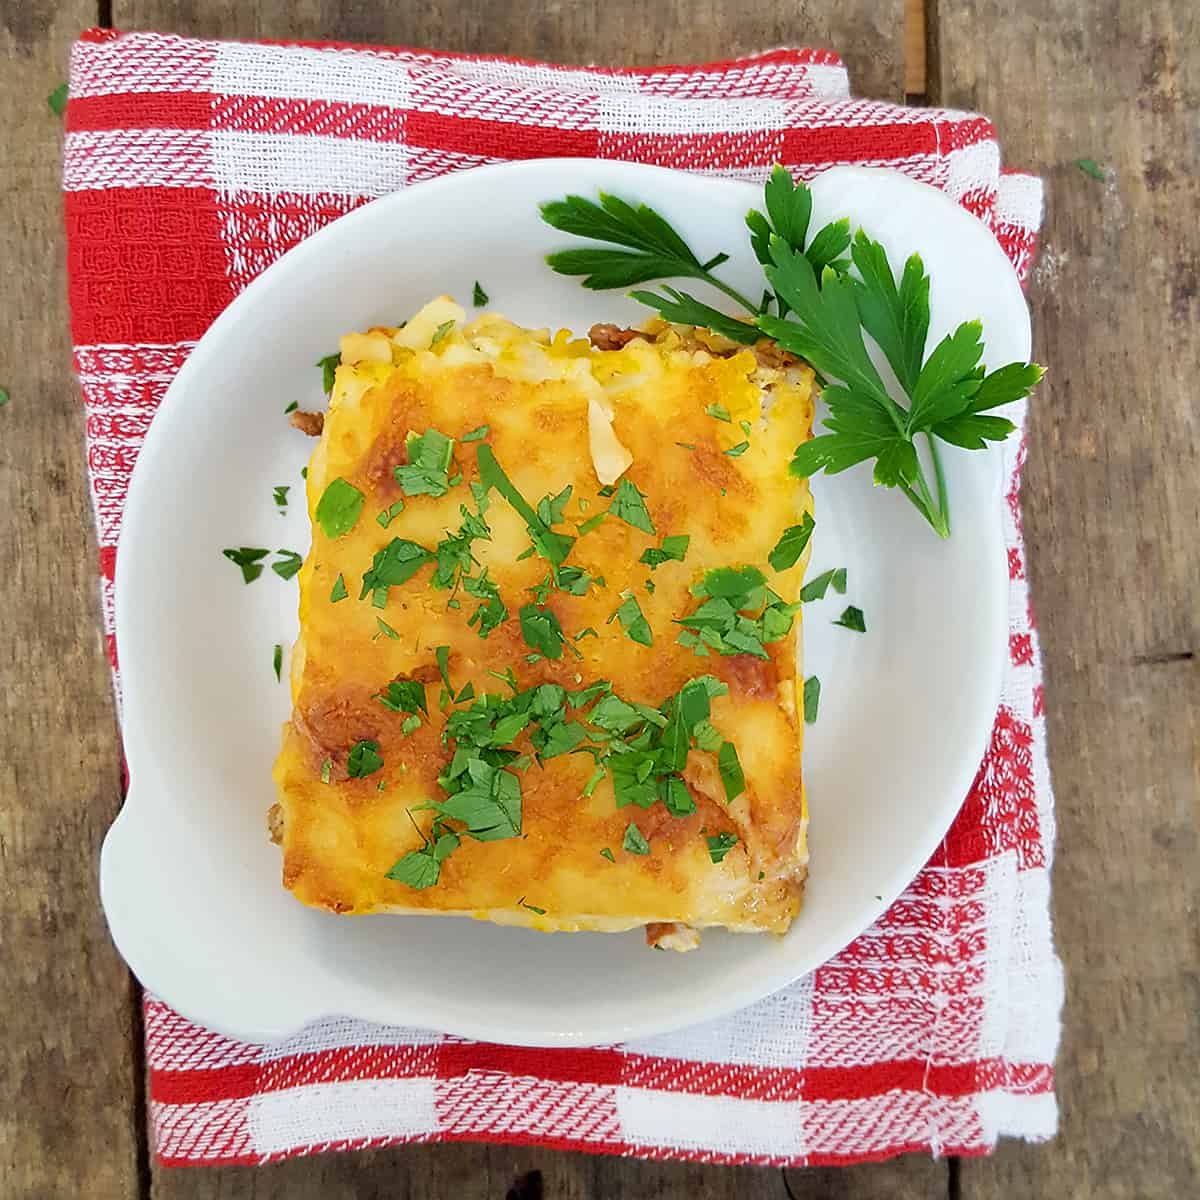 My Egg Noodle Lasagna recipe is a real family pleaser with layers and layers of meat sauce, cheesy filling, and egg noodles. https://www.lanascooking.com/egg-noodle-lasagna/